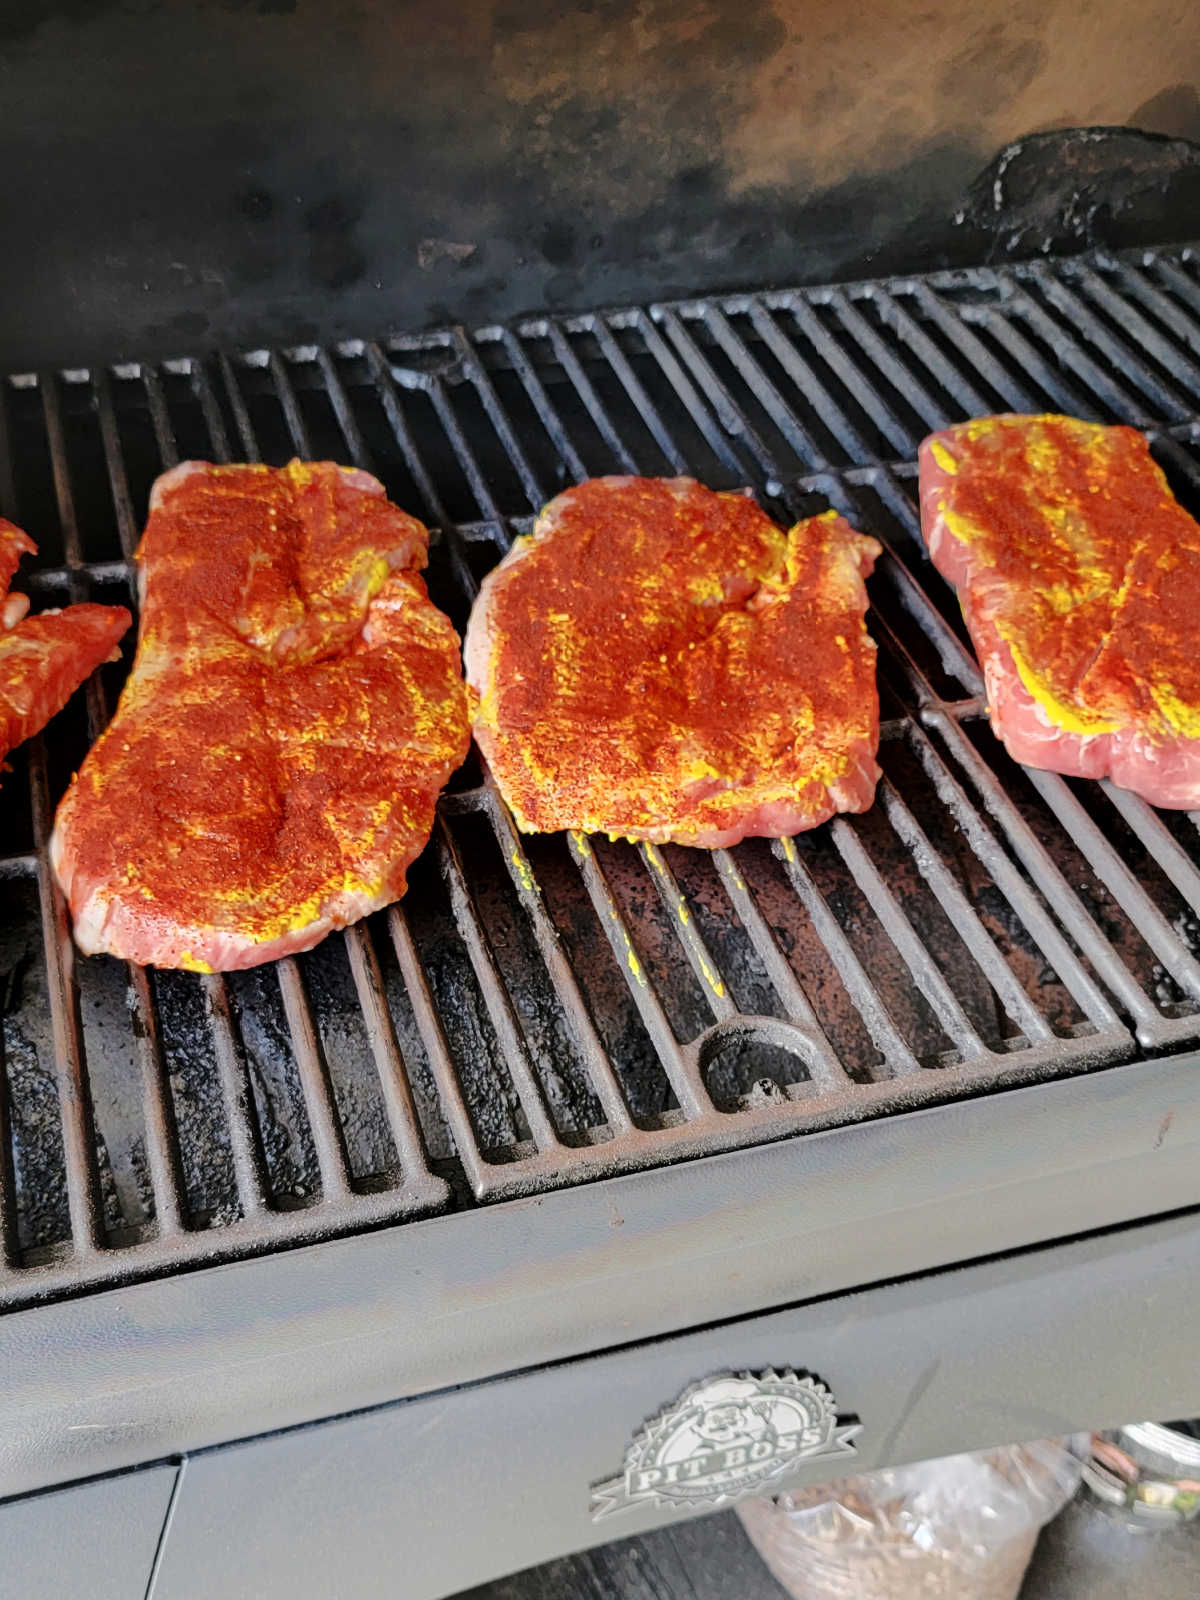 Pork steaks coated in mustard and dry rub on the smoker grates, ready to start cooking.